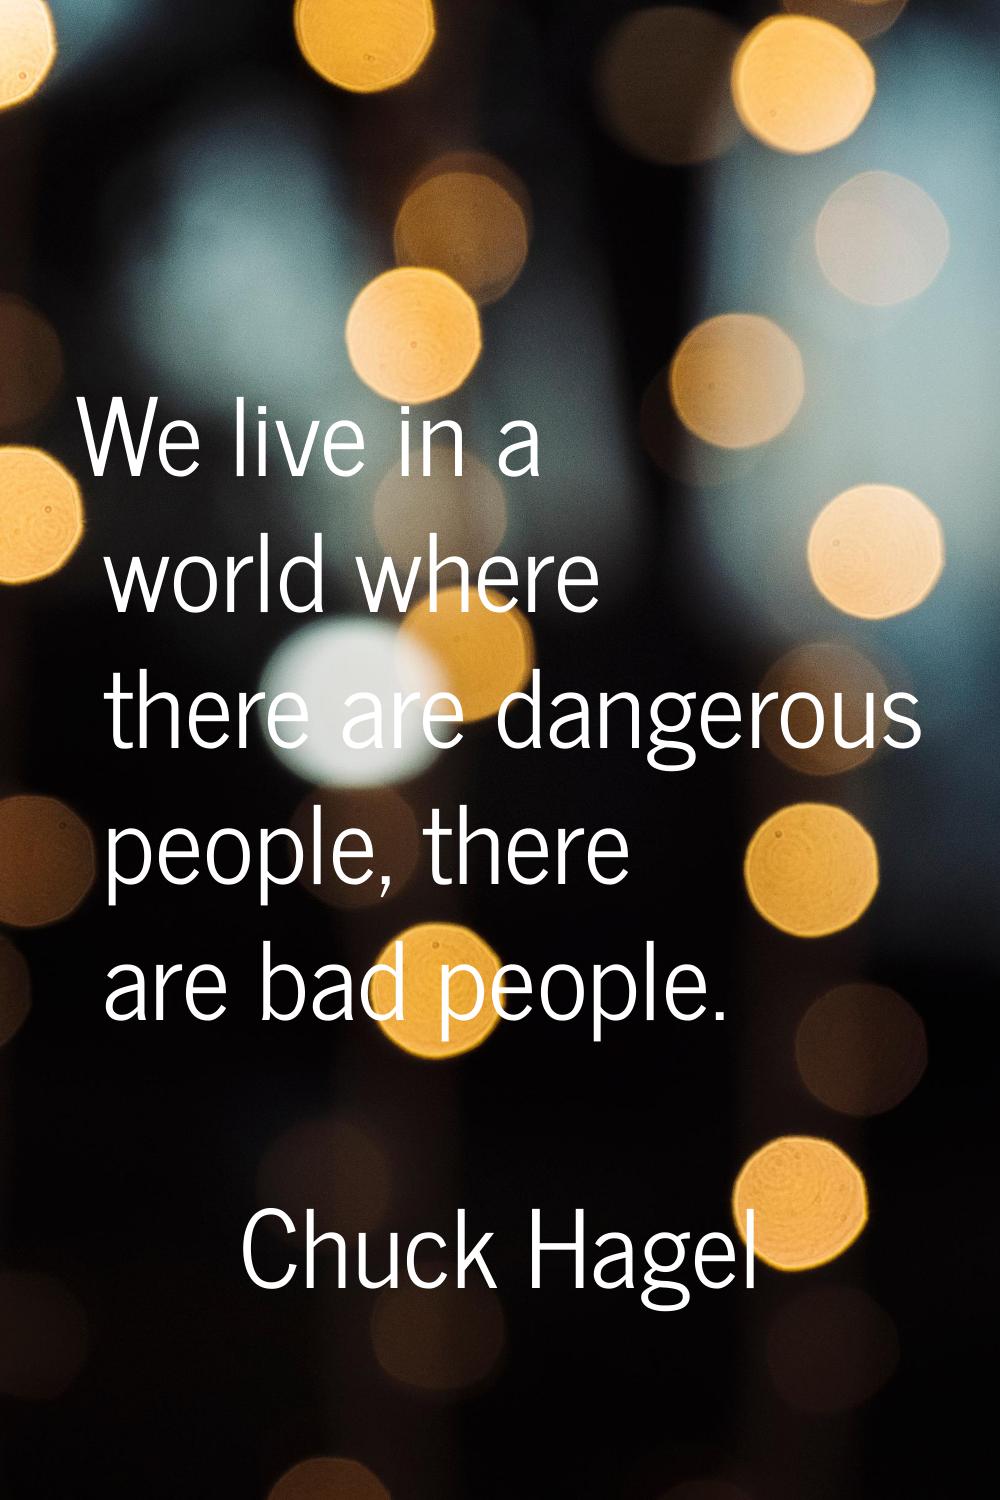 We live in a world where there are dangerous people, there are bad people.